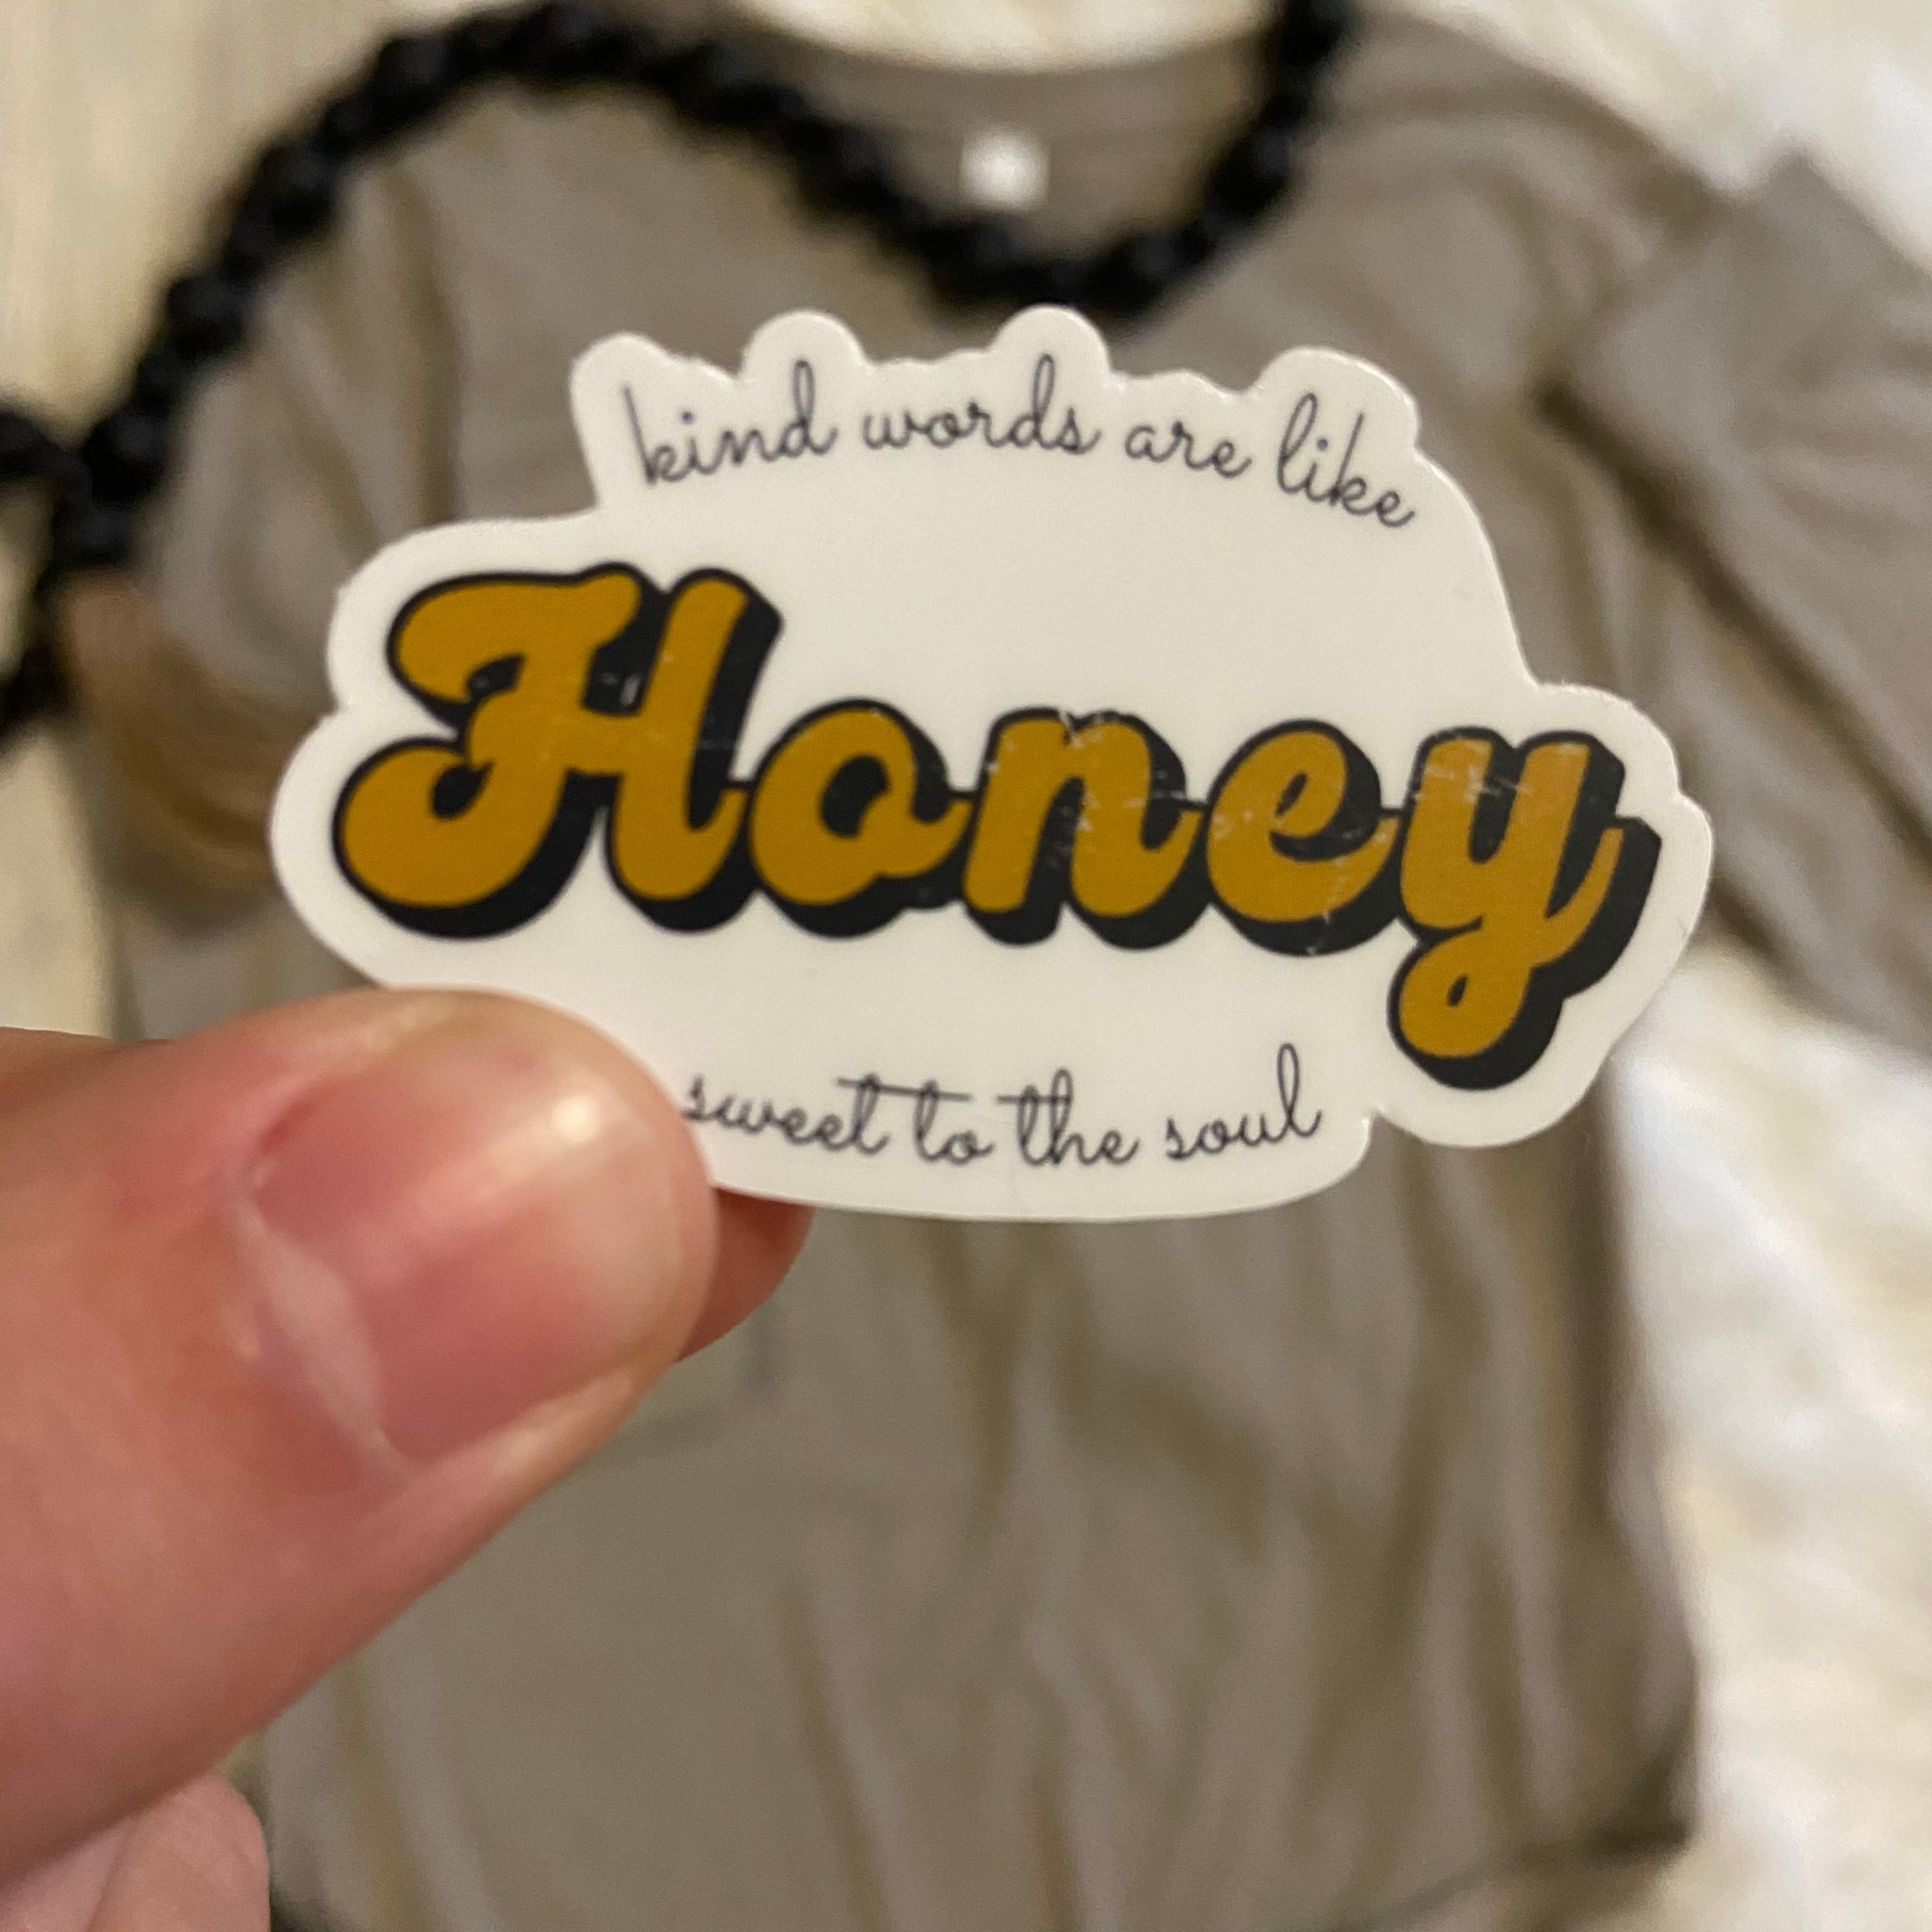 Kind words are like honey, sweet to the soul text on a sticker